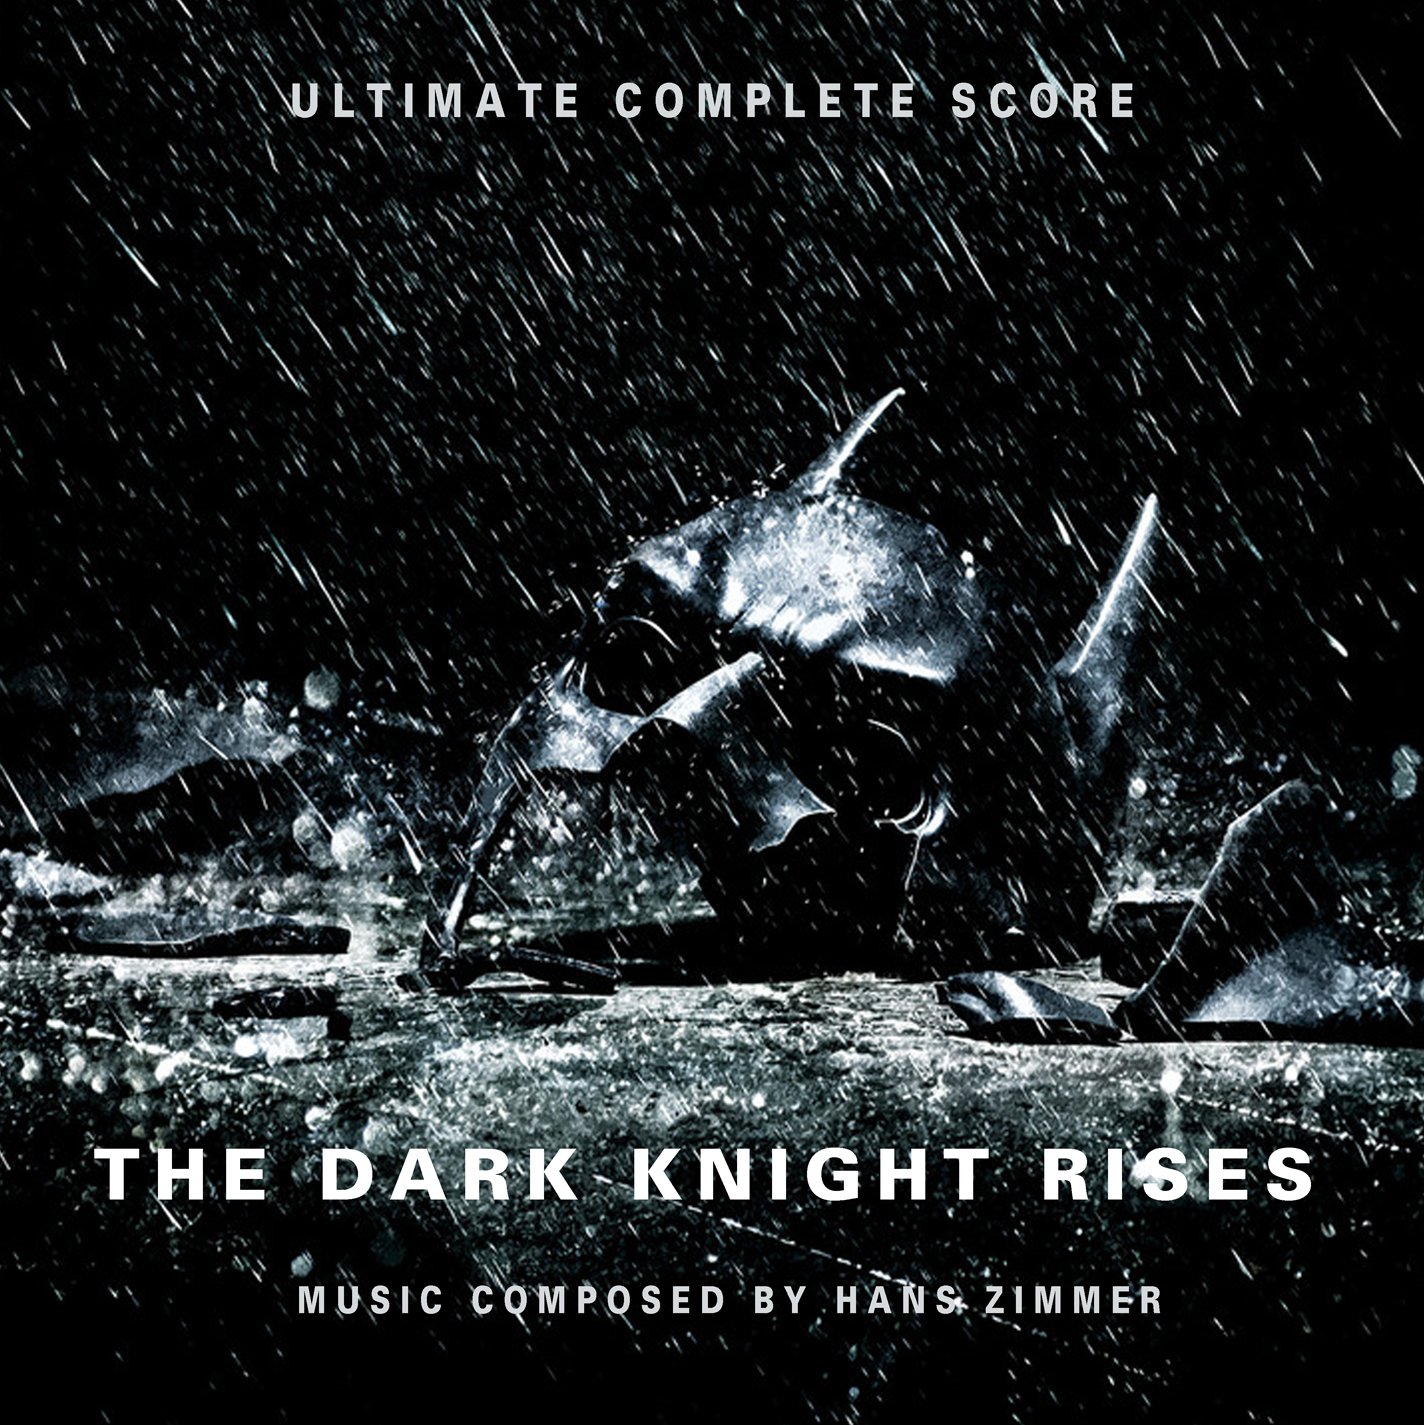 The Dark Knight Rises (Ultimate Complete Score) — Hans Zimmer 